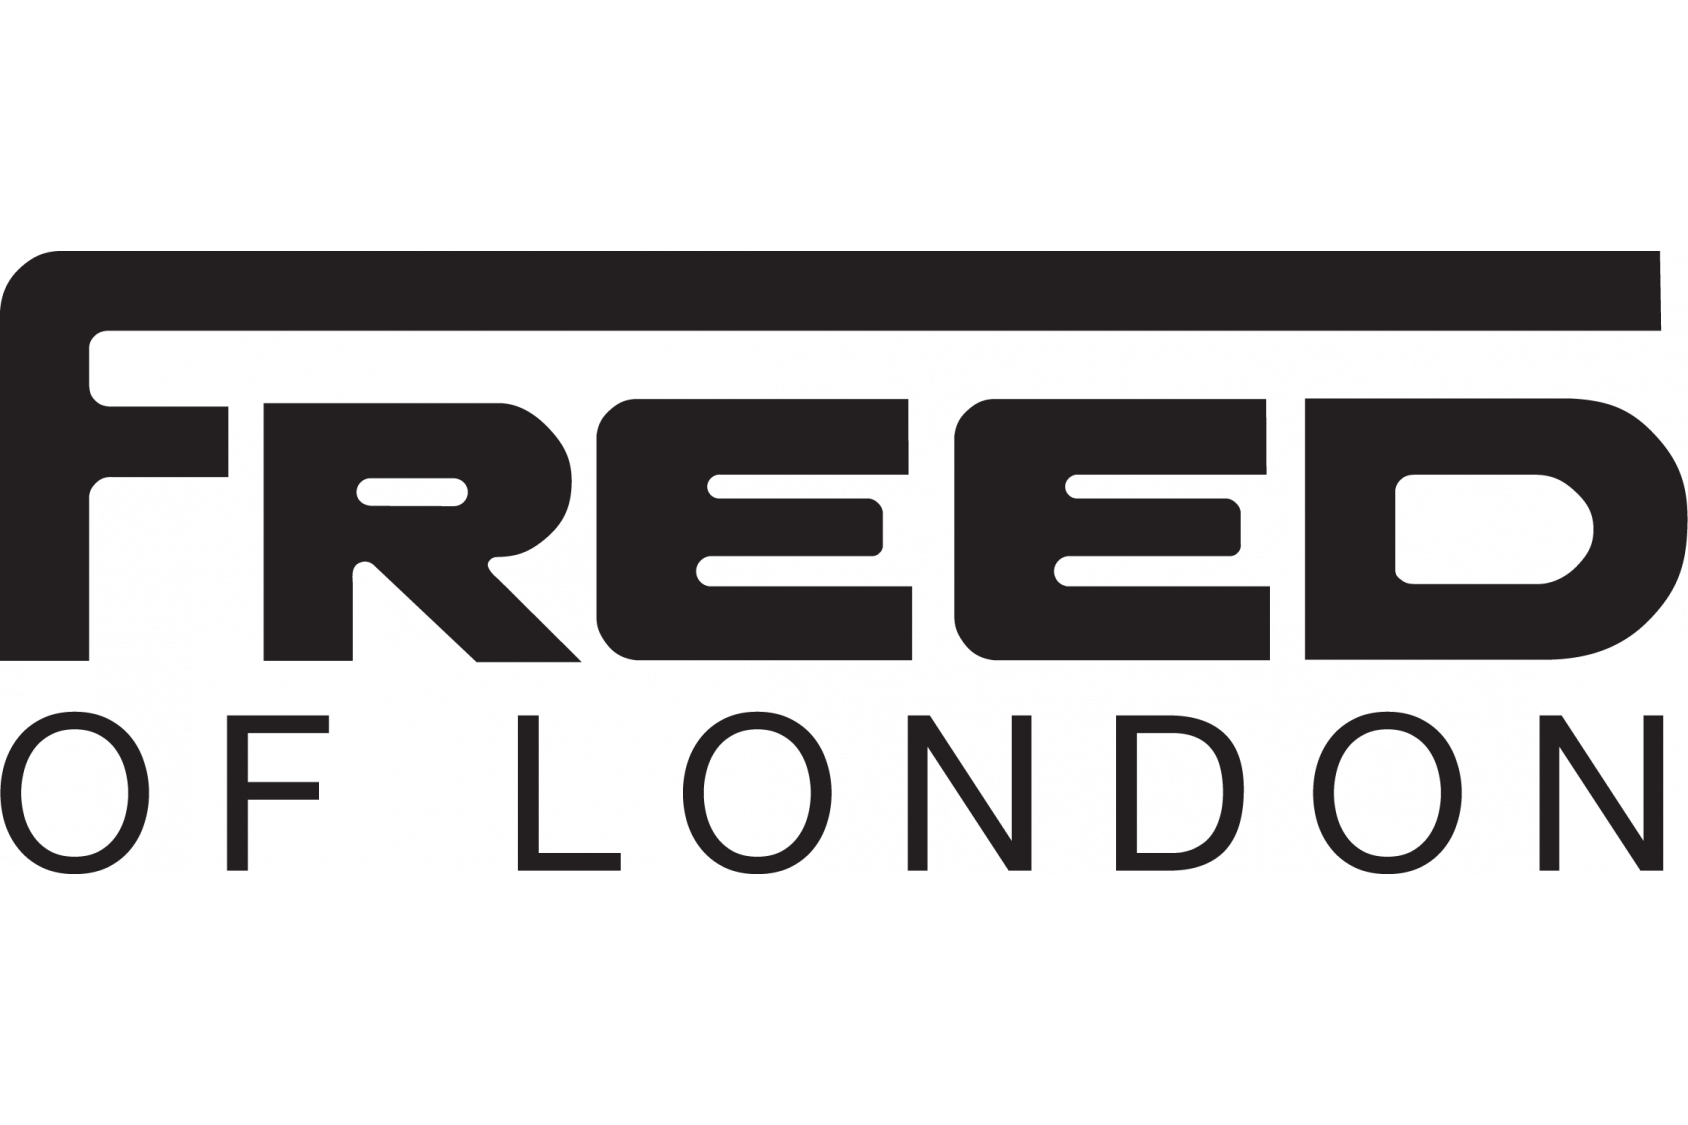 FREED OF LONDON